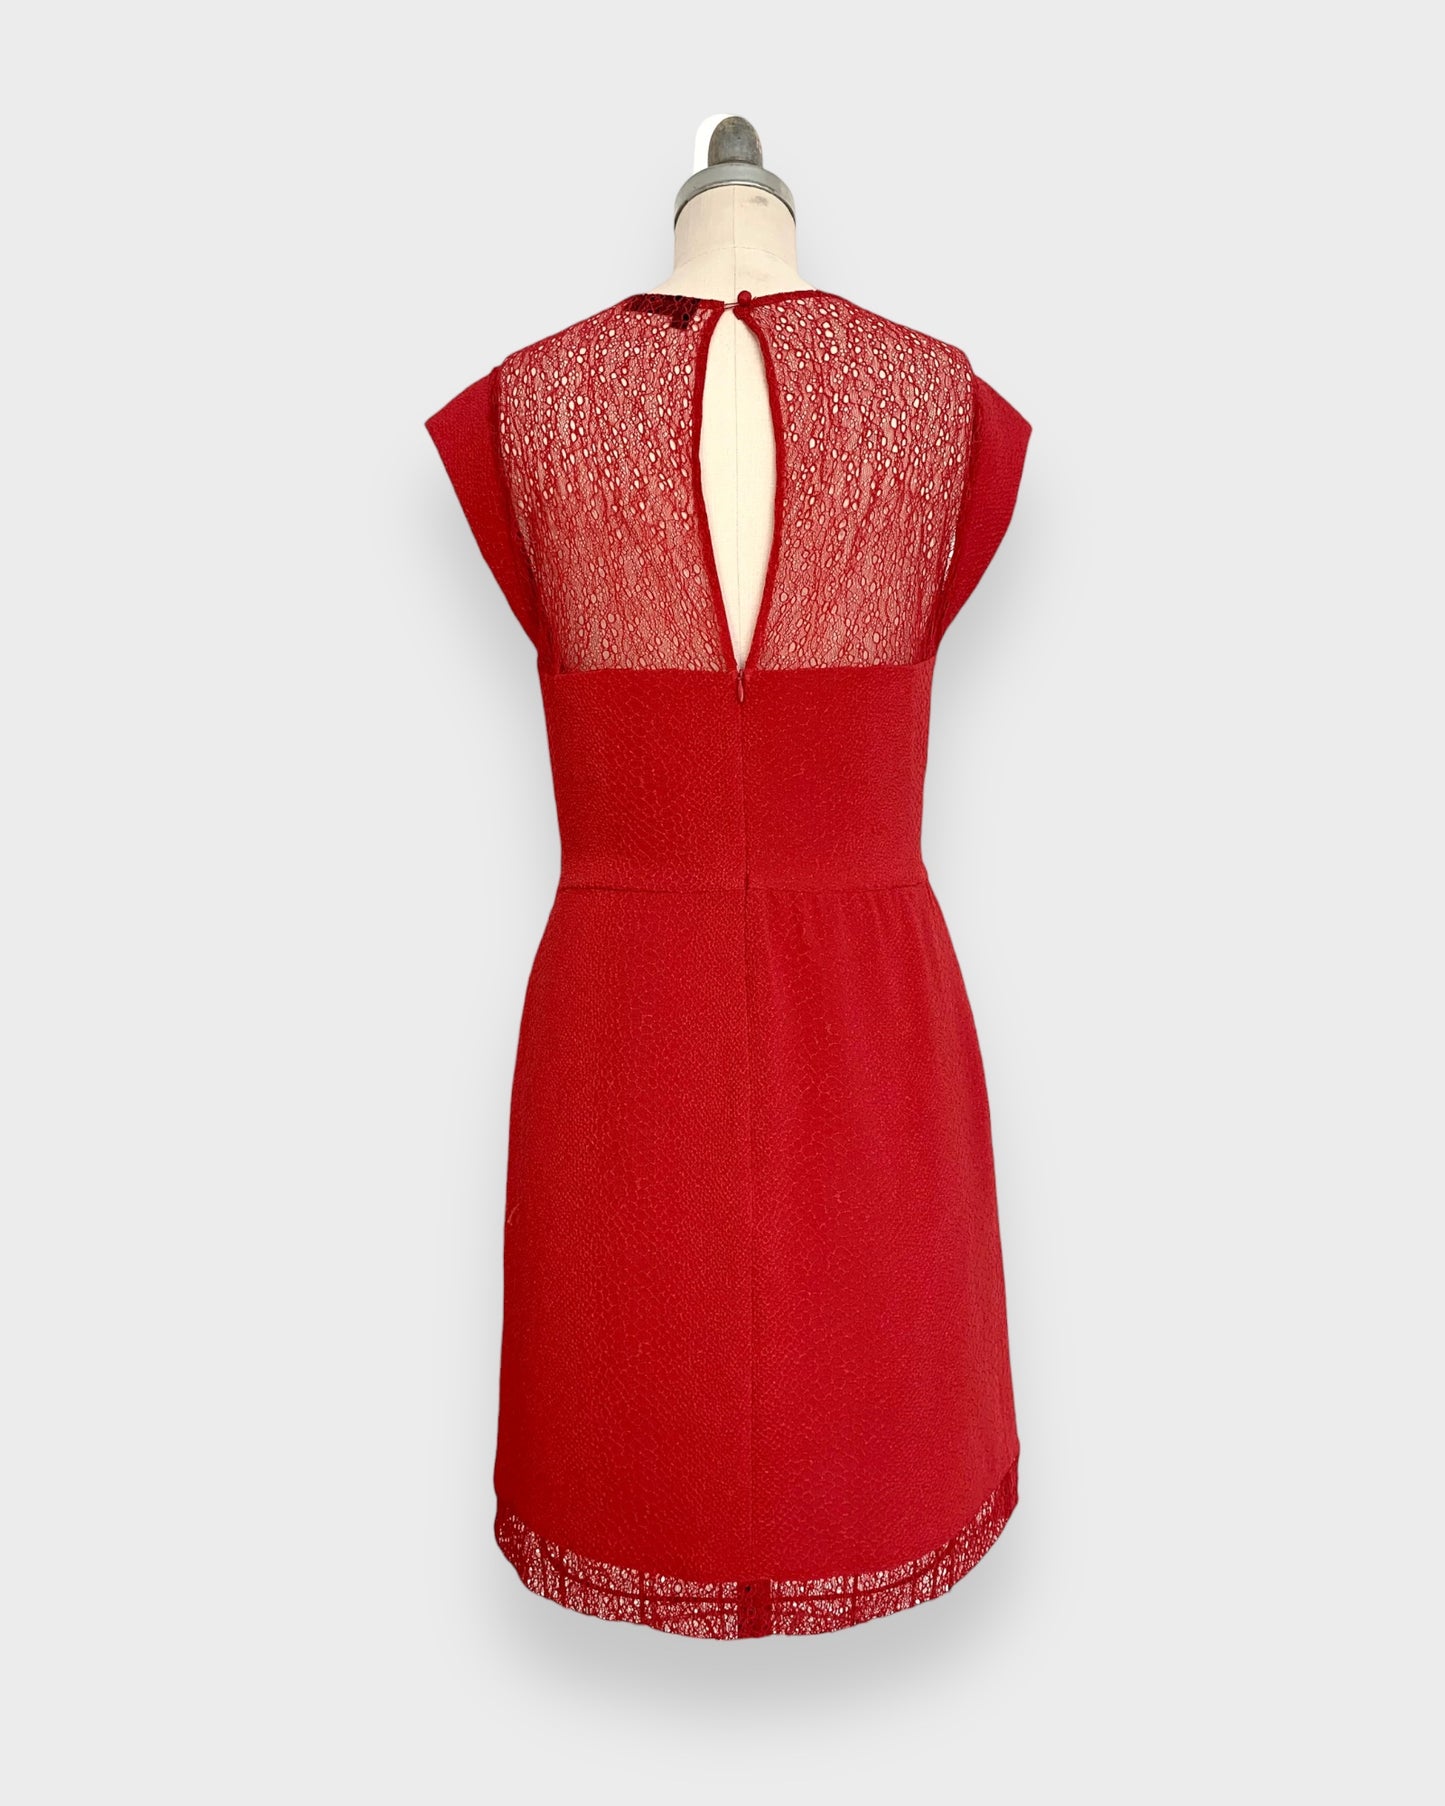 The Kooples red lace dress